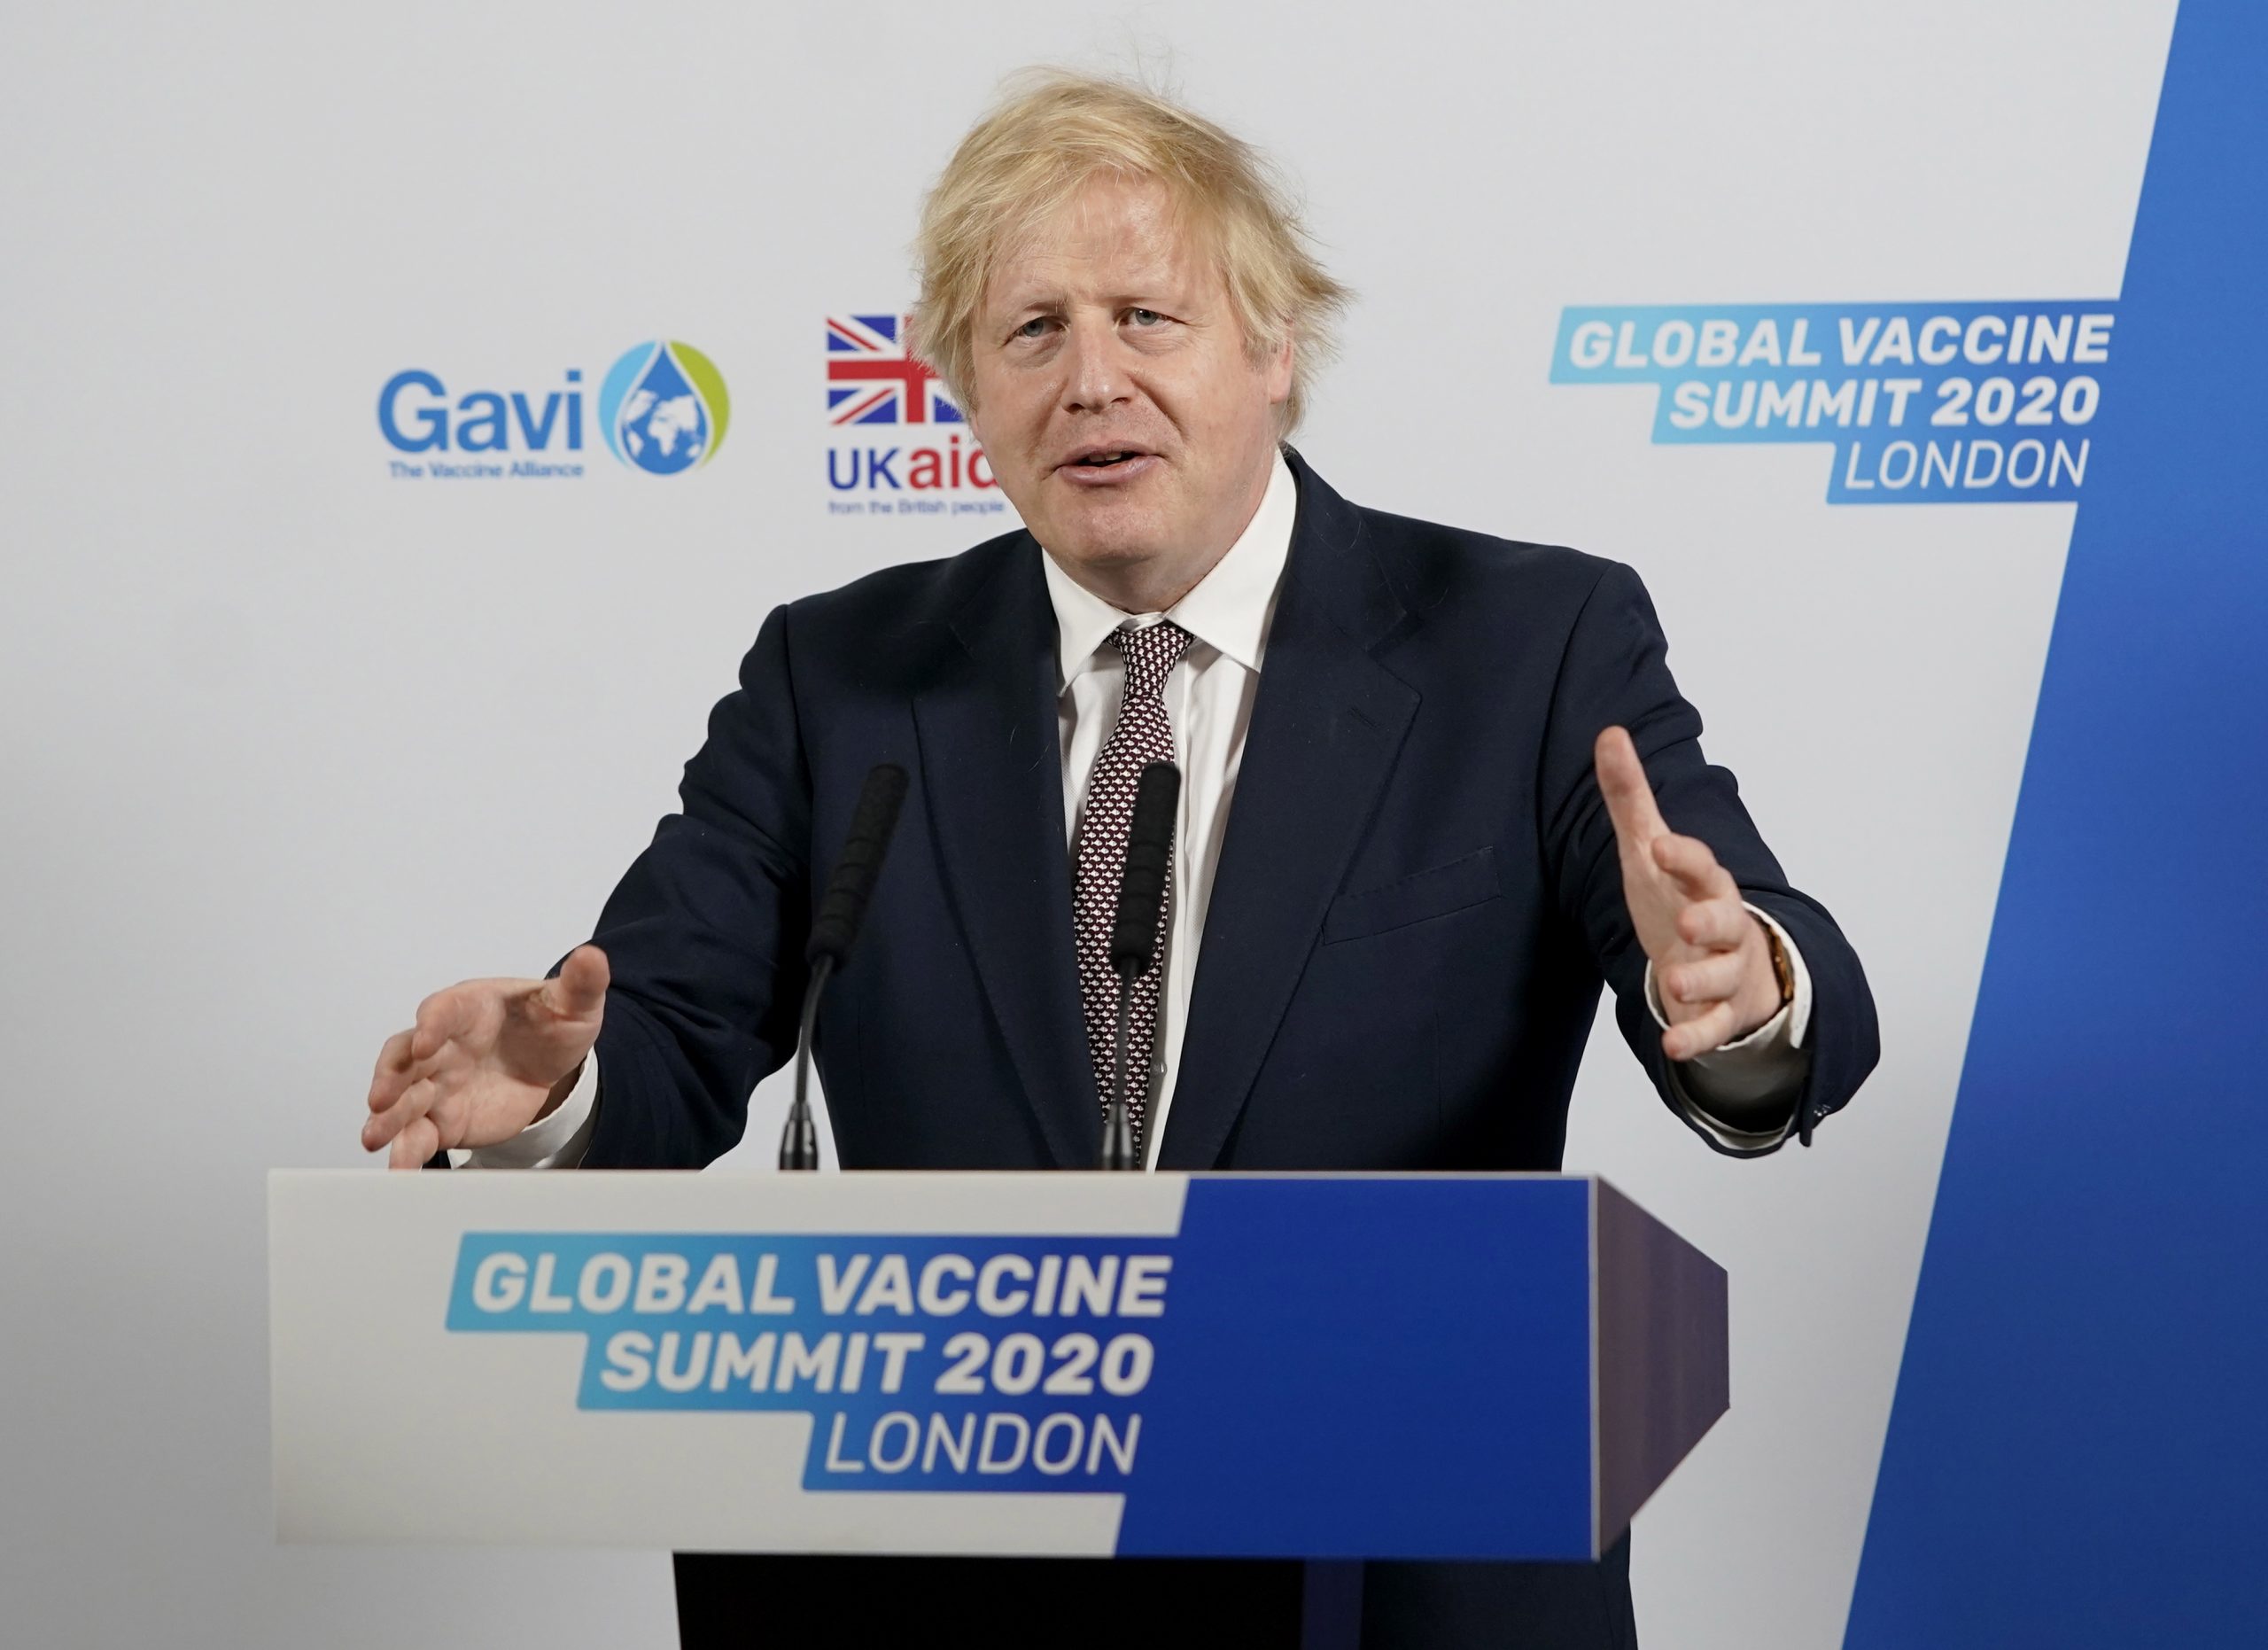 epa08465531 A handout photo made available by n 10 Downing street shows Britain's Prime Minister, Boris Johnson delivering his speech to the Global Vaccine Summit (GAVI) via zoom from the White Room of n10 Downing street in London, Britain, 04 June 2020.  EPA/ANDREW PARSONS/DOWNING STREET HANDOUT This image is for Editorial use purposes only. The Image can not be used for advertising or commercial use. The Image can not be altered in any form. Credit should read Andrew Parsons/n10 Downing street. HANDOUT EDITORIAL USE ONLY/NO SALES